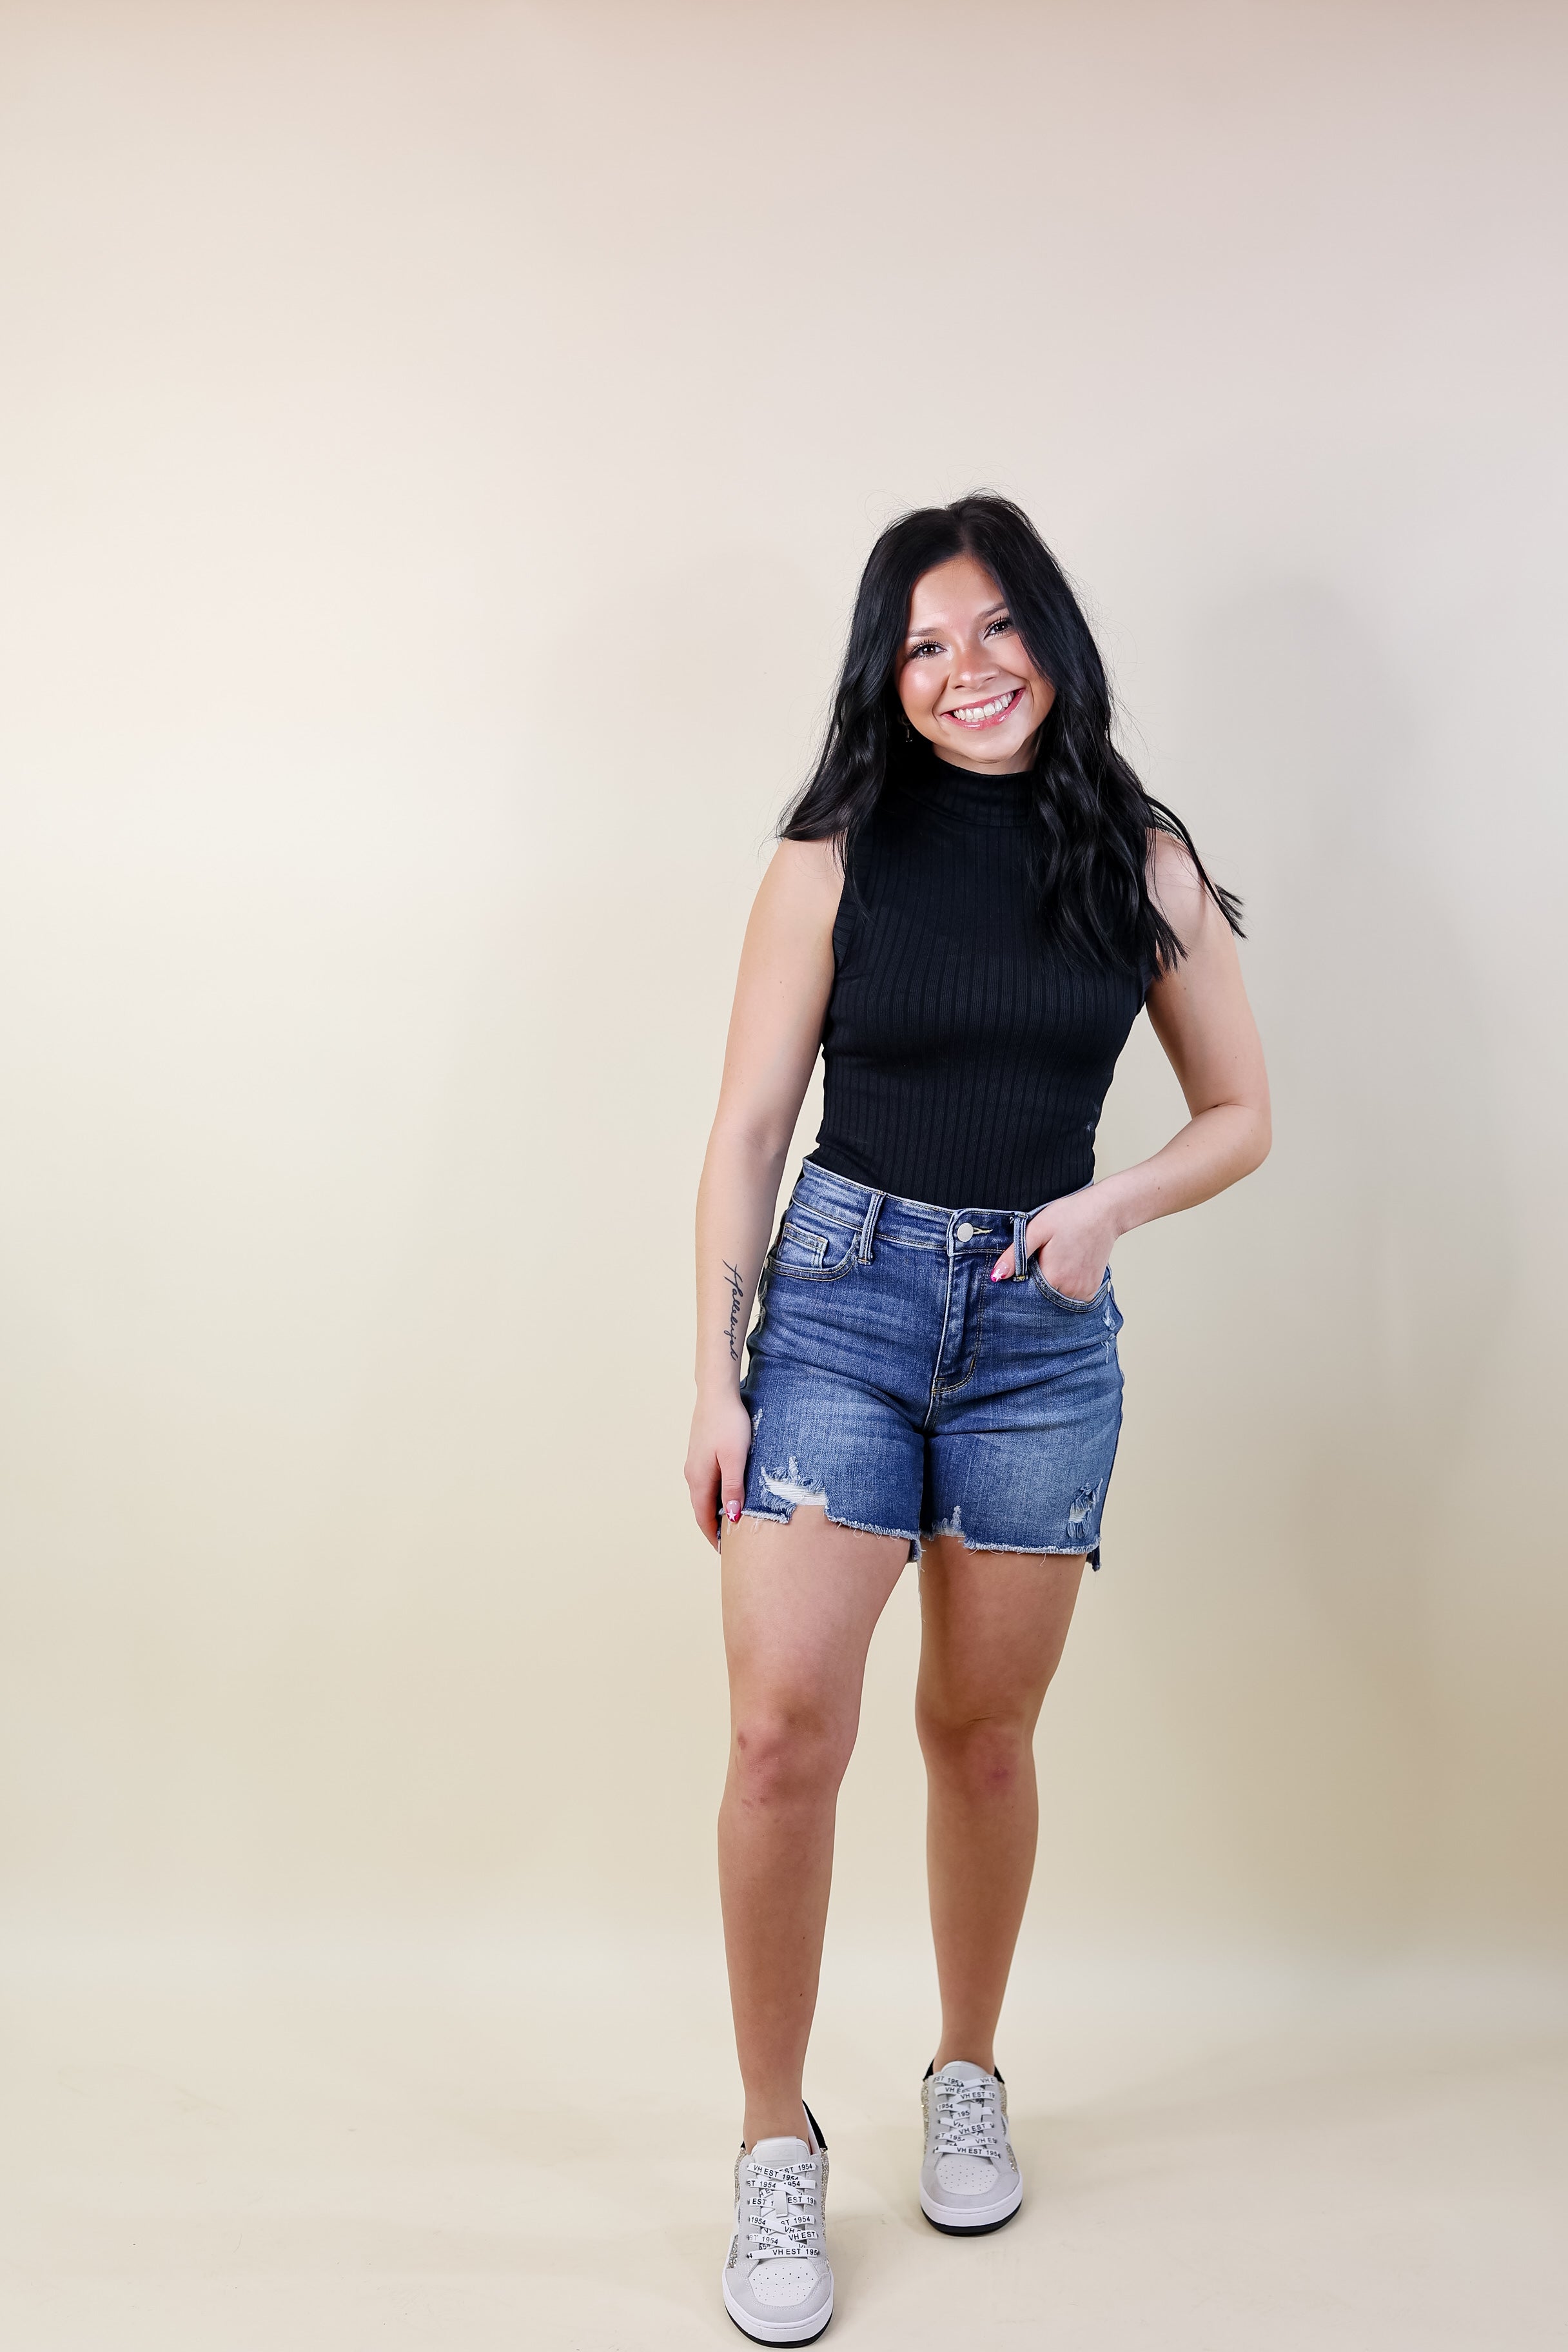 Judy Blue | Summer Daze Mid Thigh High-Low Shorts in Medium Wash - Giddy Up Glamour Boutique